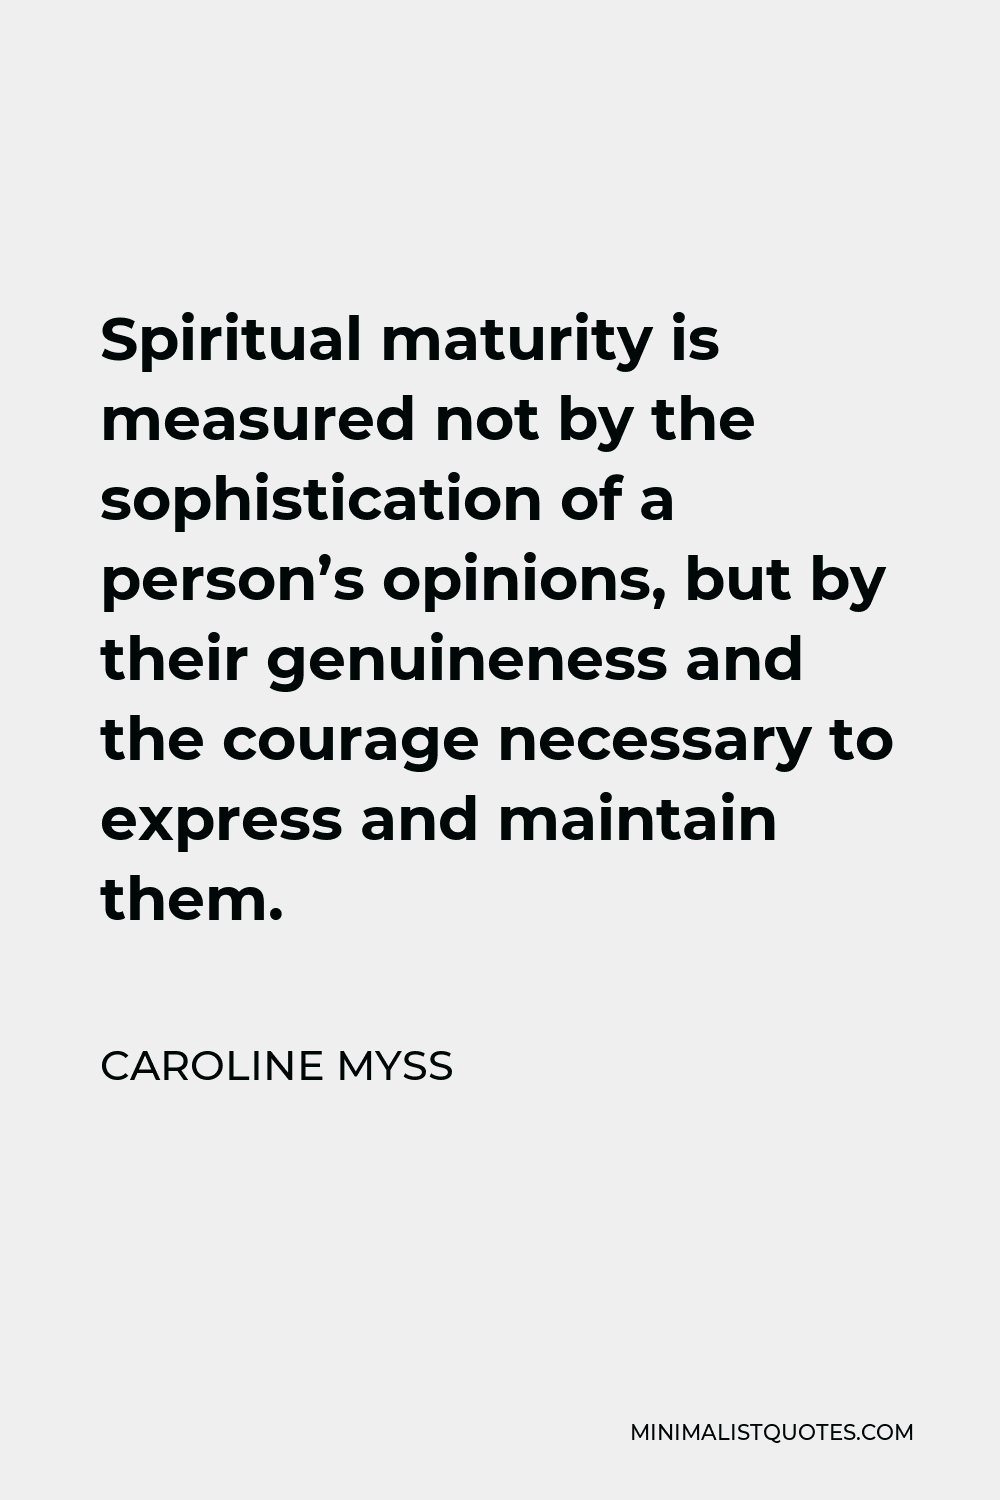 Caroline Myss Quote - Spiritual maturity is measured not by the sophistication of a person’s opinions, but by their genuineness and the courage necessary to express and maintain them.